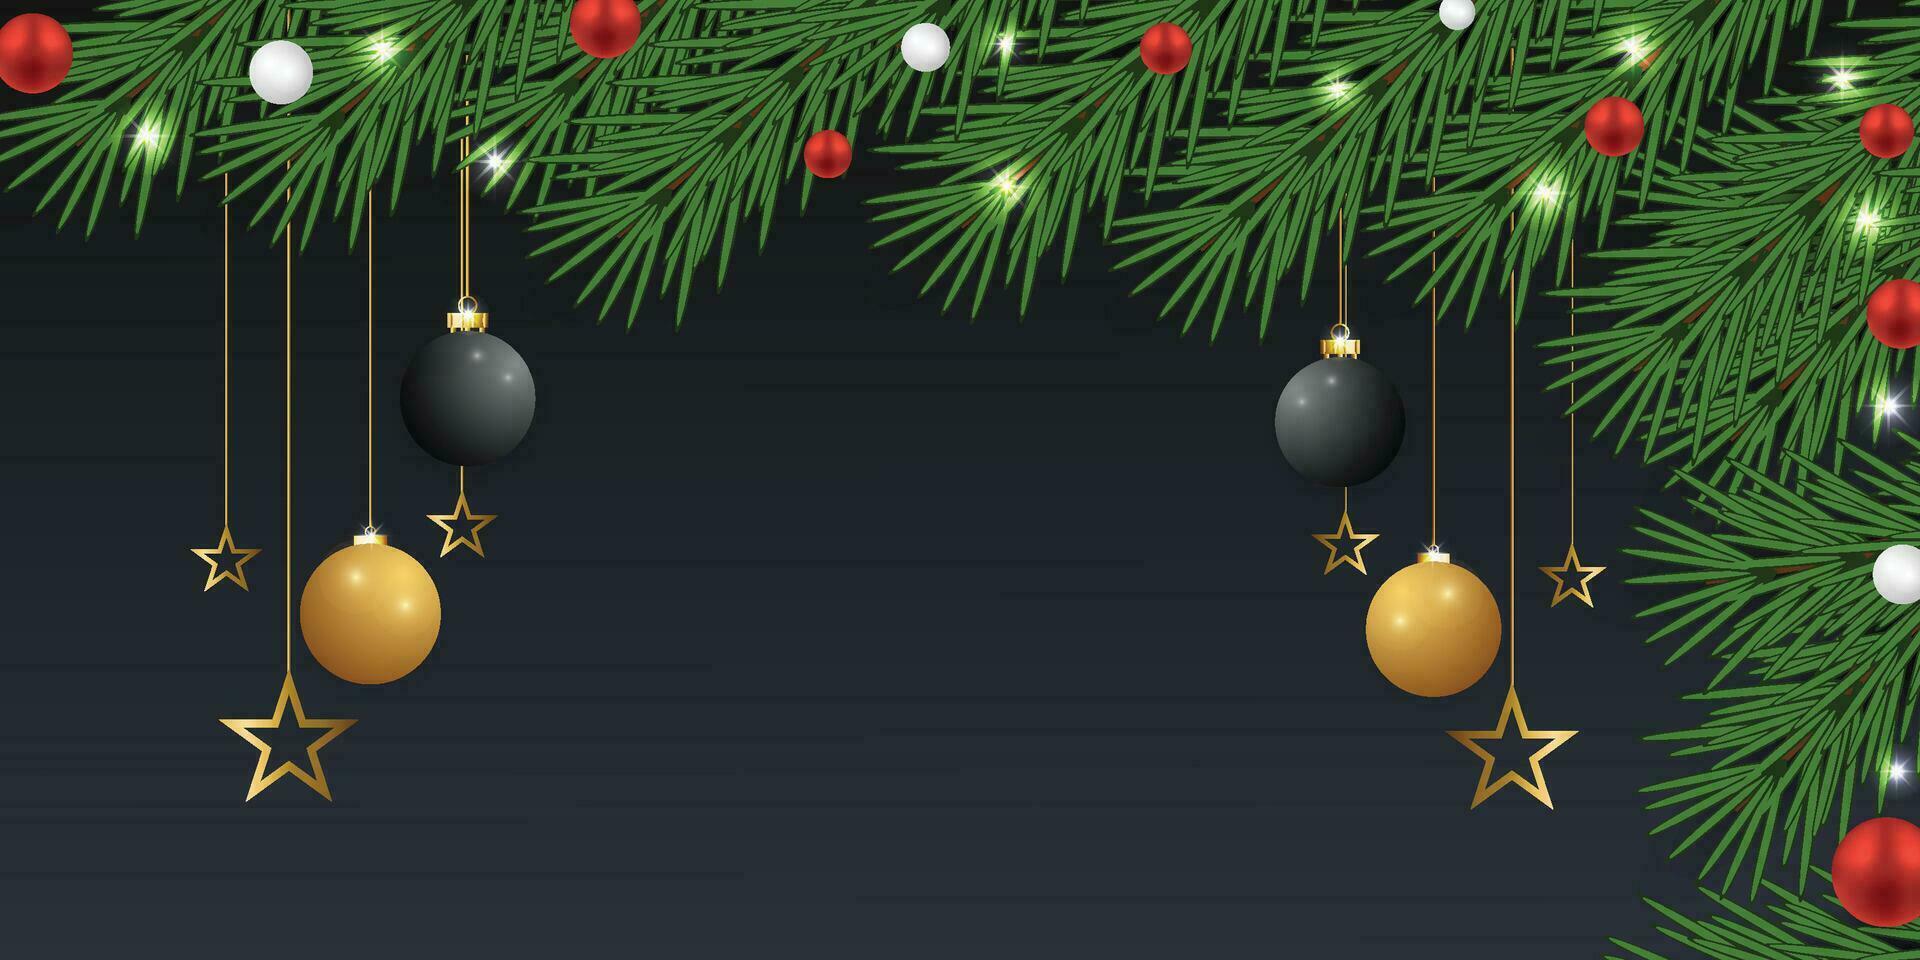 Realistic Christmas green leaf banner with golden and black-red balls with lights and golden stars with a back background. vector